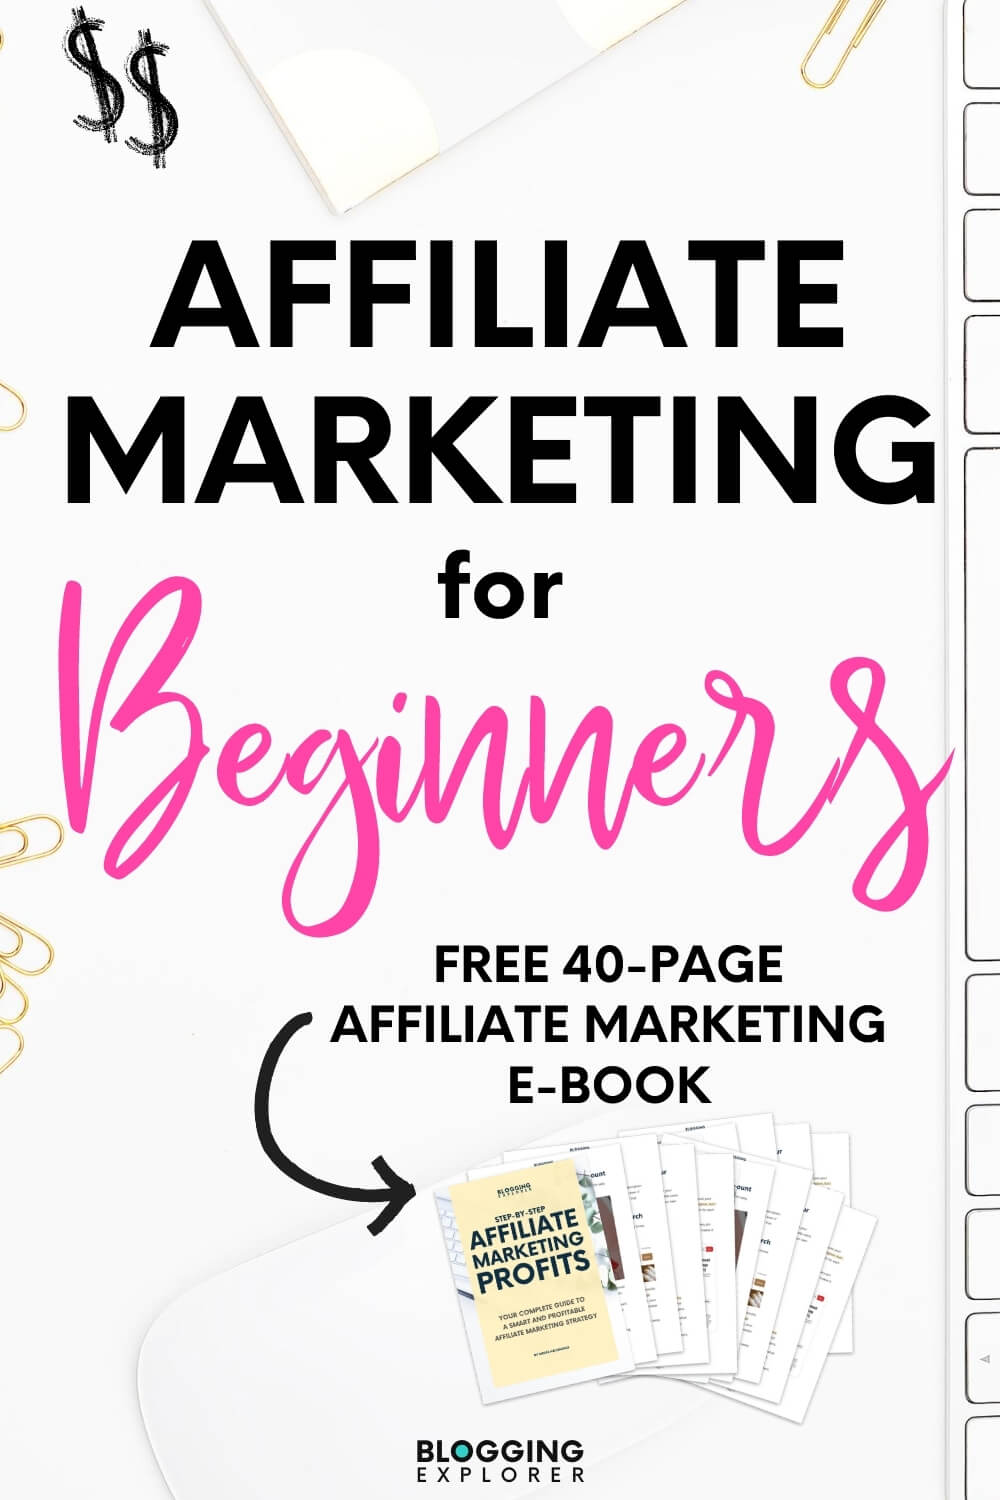 Affiliate Marketing for Dummies in 2021: How to Make Money Step-by-Step